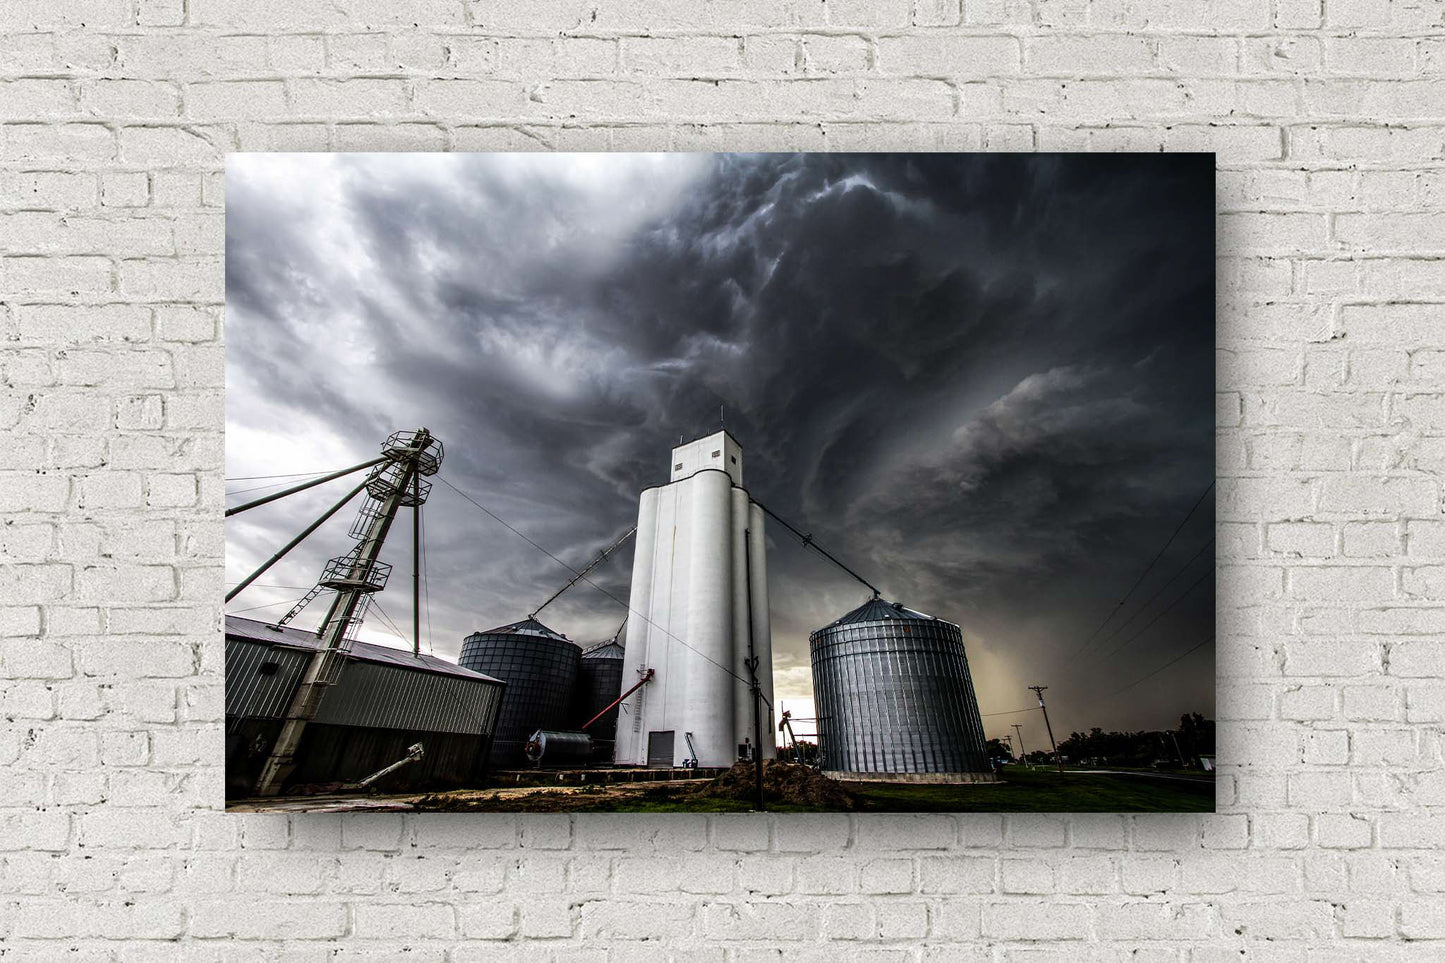 Thunderstorm metal print on aluminum of storm clouds swirling over a grain elevator in a small town in Kansas by Sean Ramsey of Southern Plains Photography.